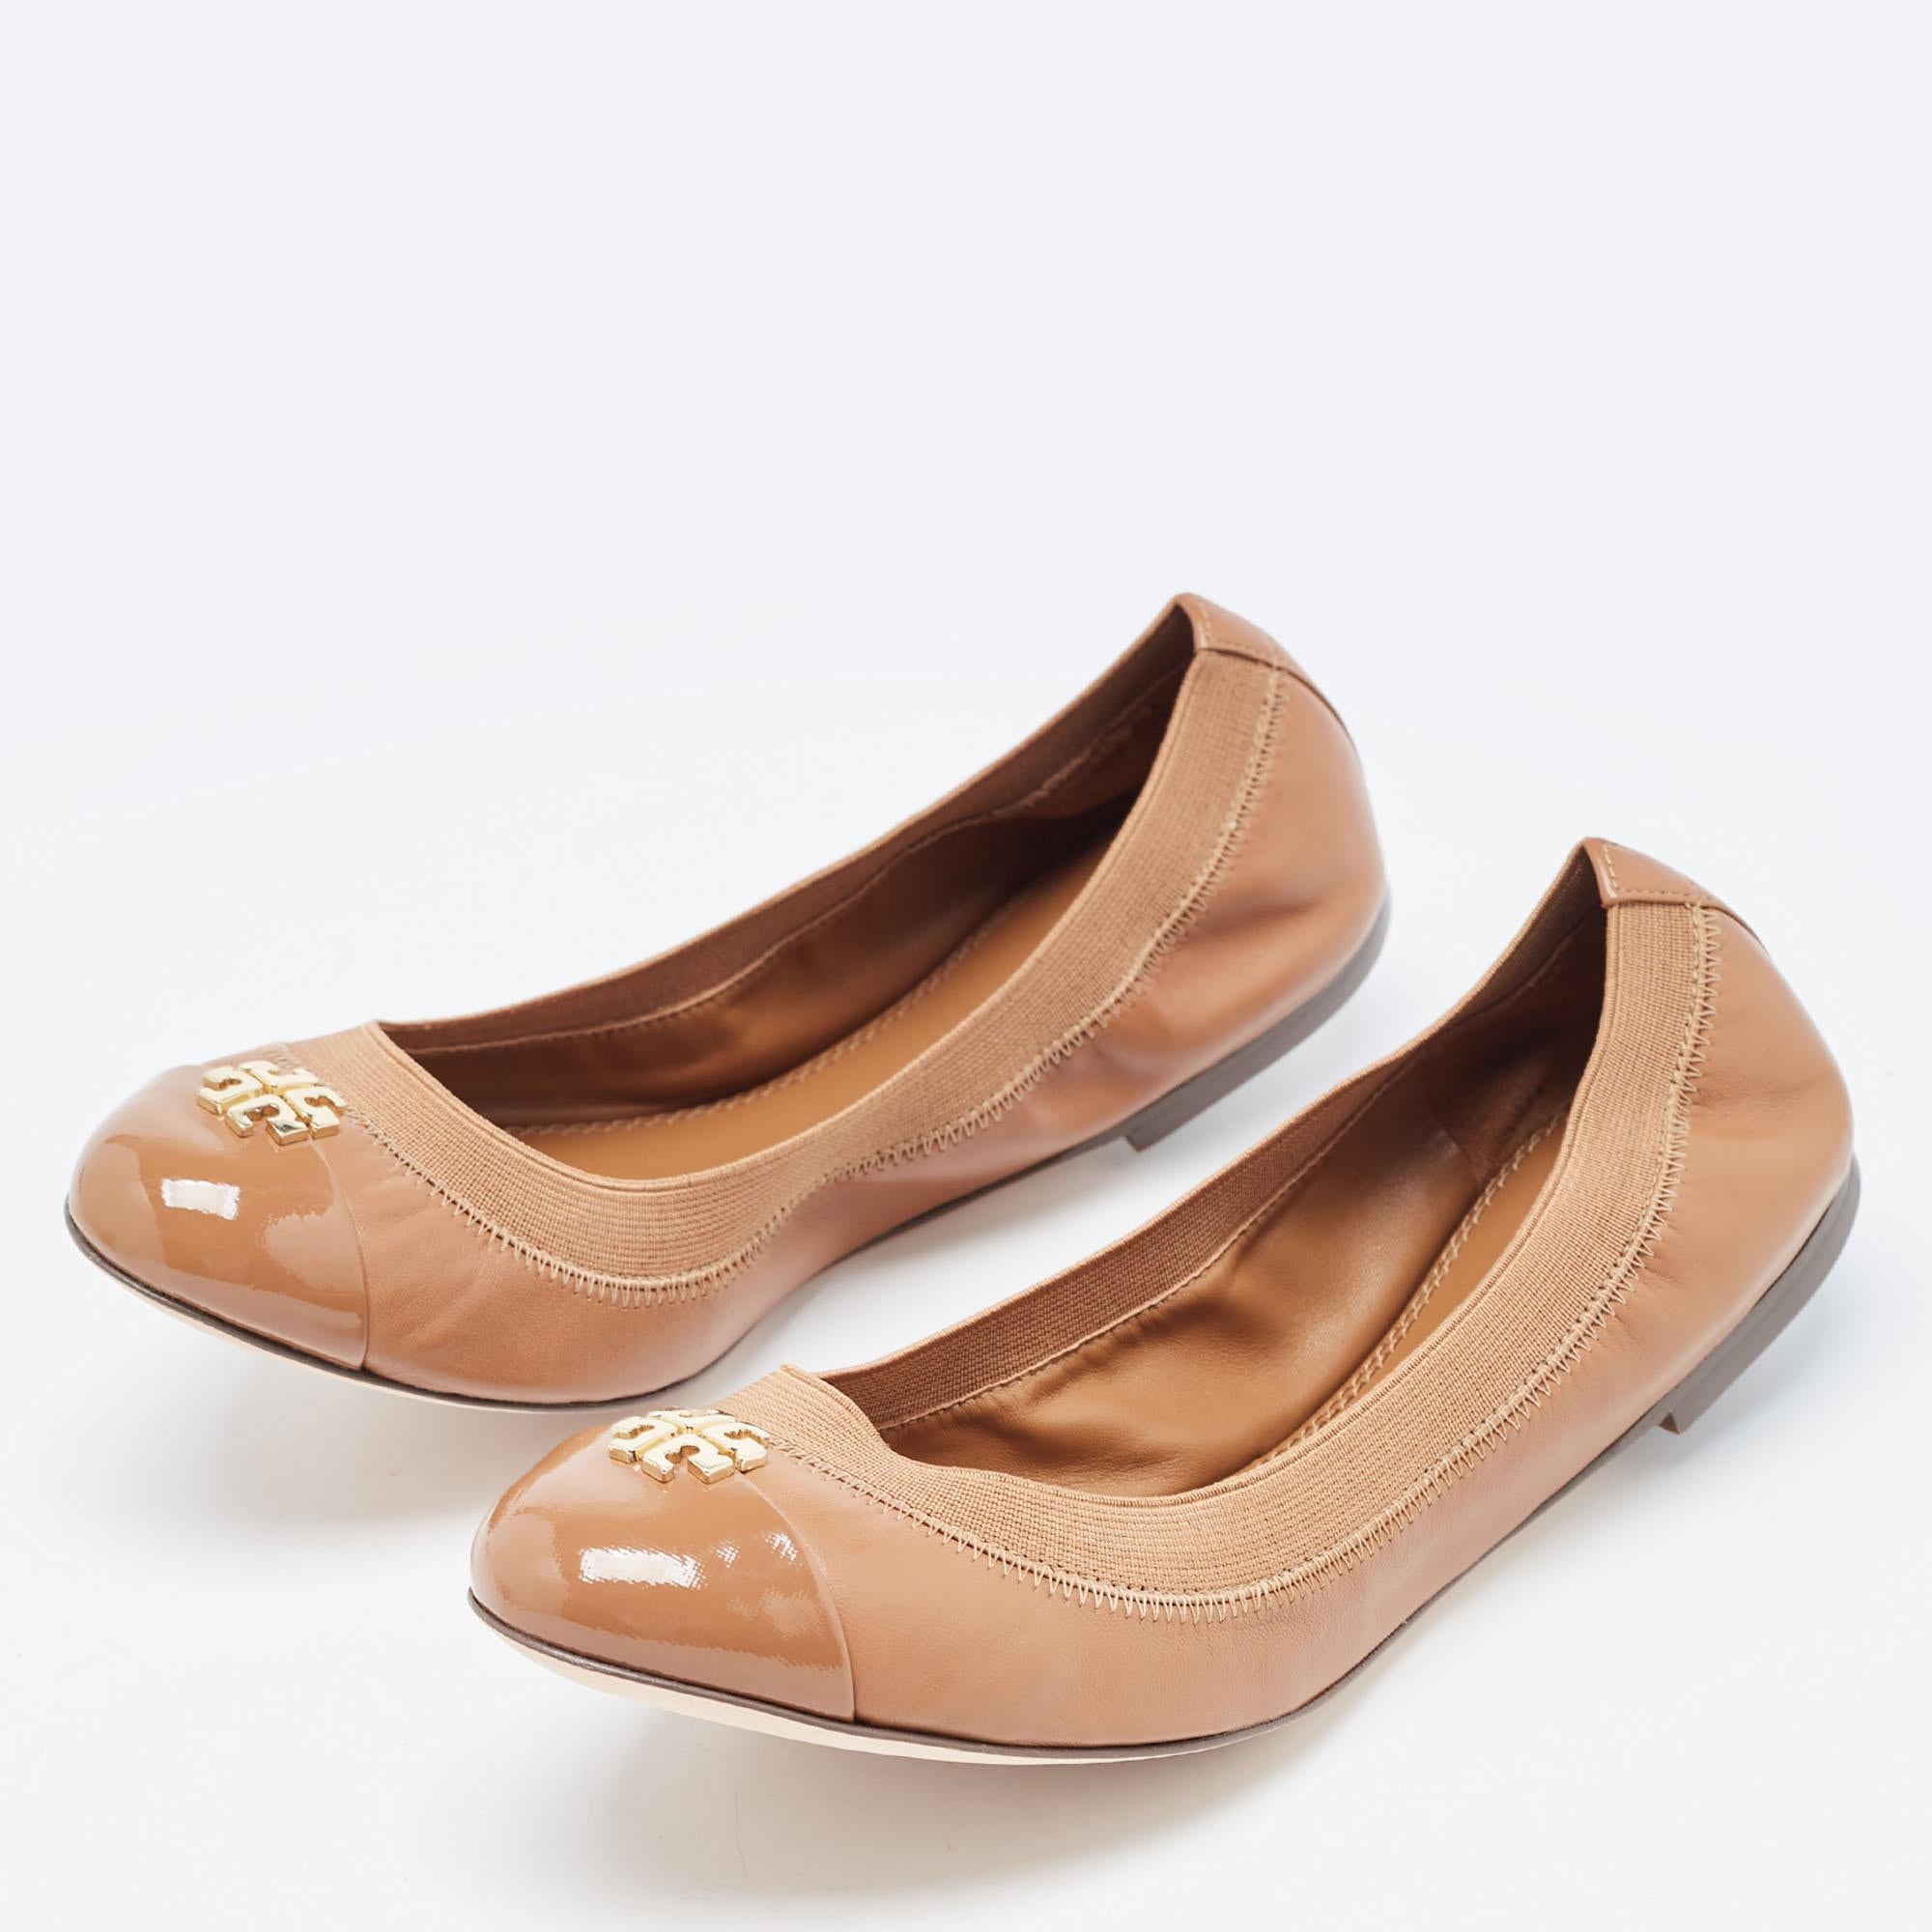 Complete your look by adding these Tory Burch ballet flats to your collection of everyday footwear. They are crafted skilfully to grant the perfect fit and style.

Includes: Original Dustbag, Original Box